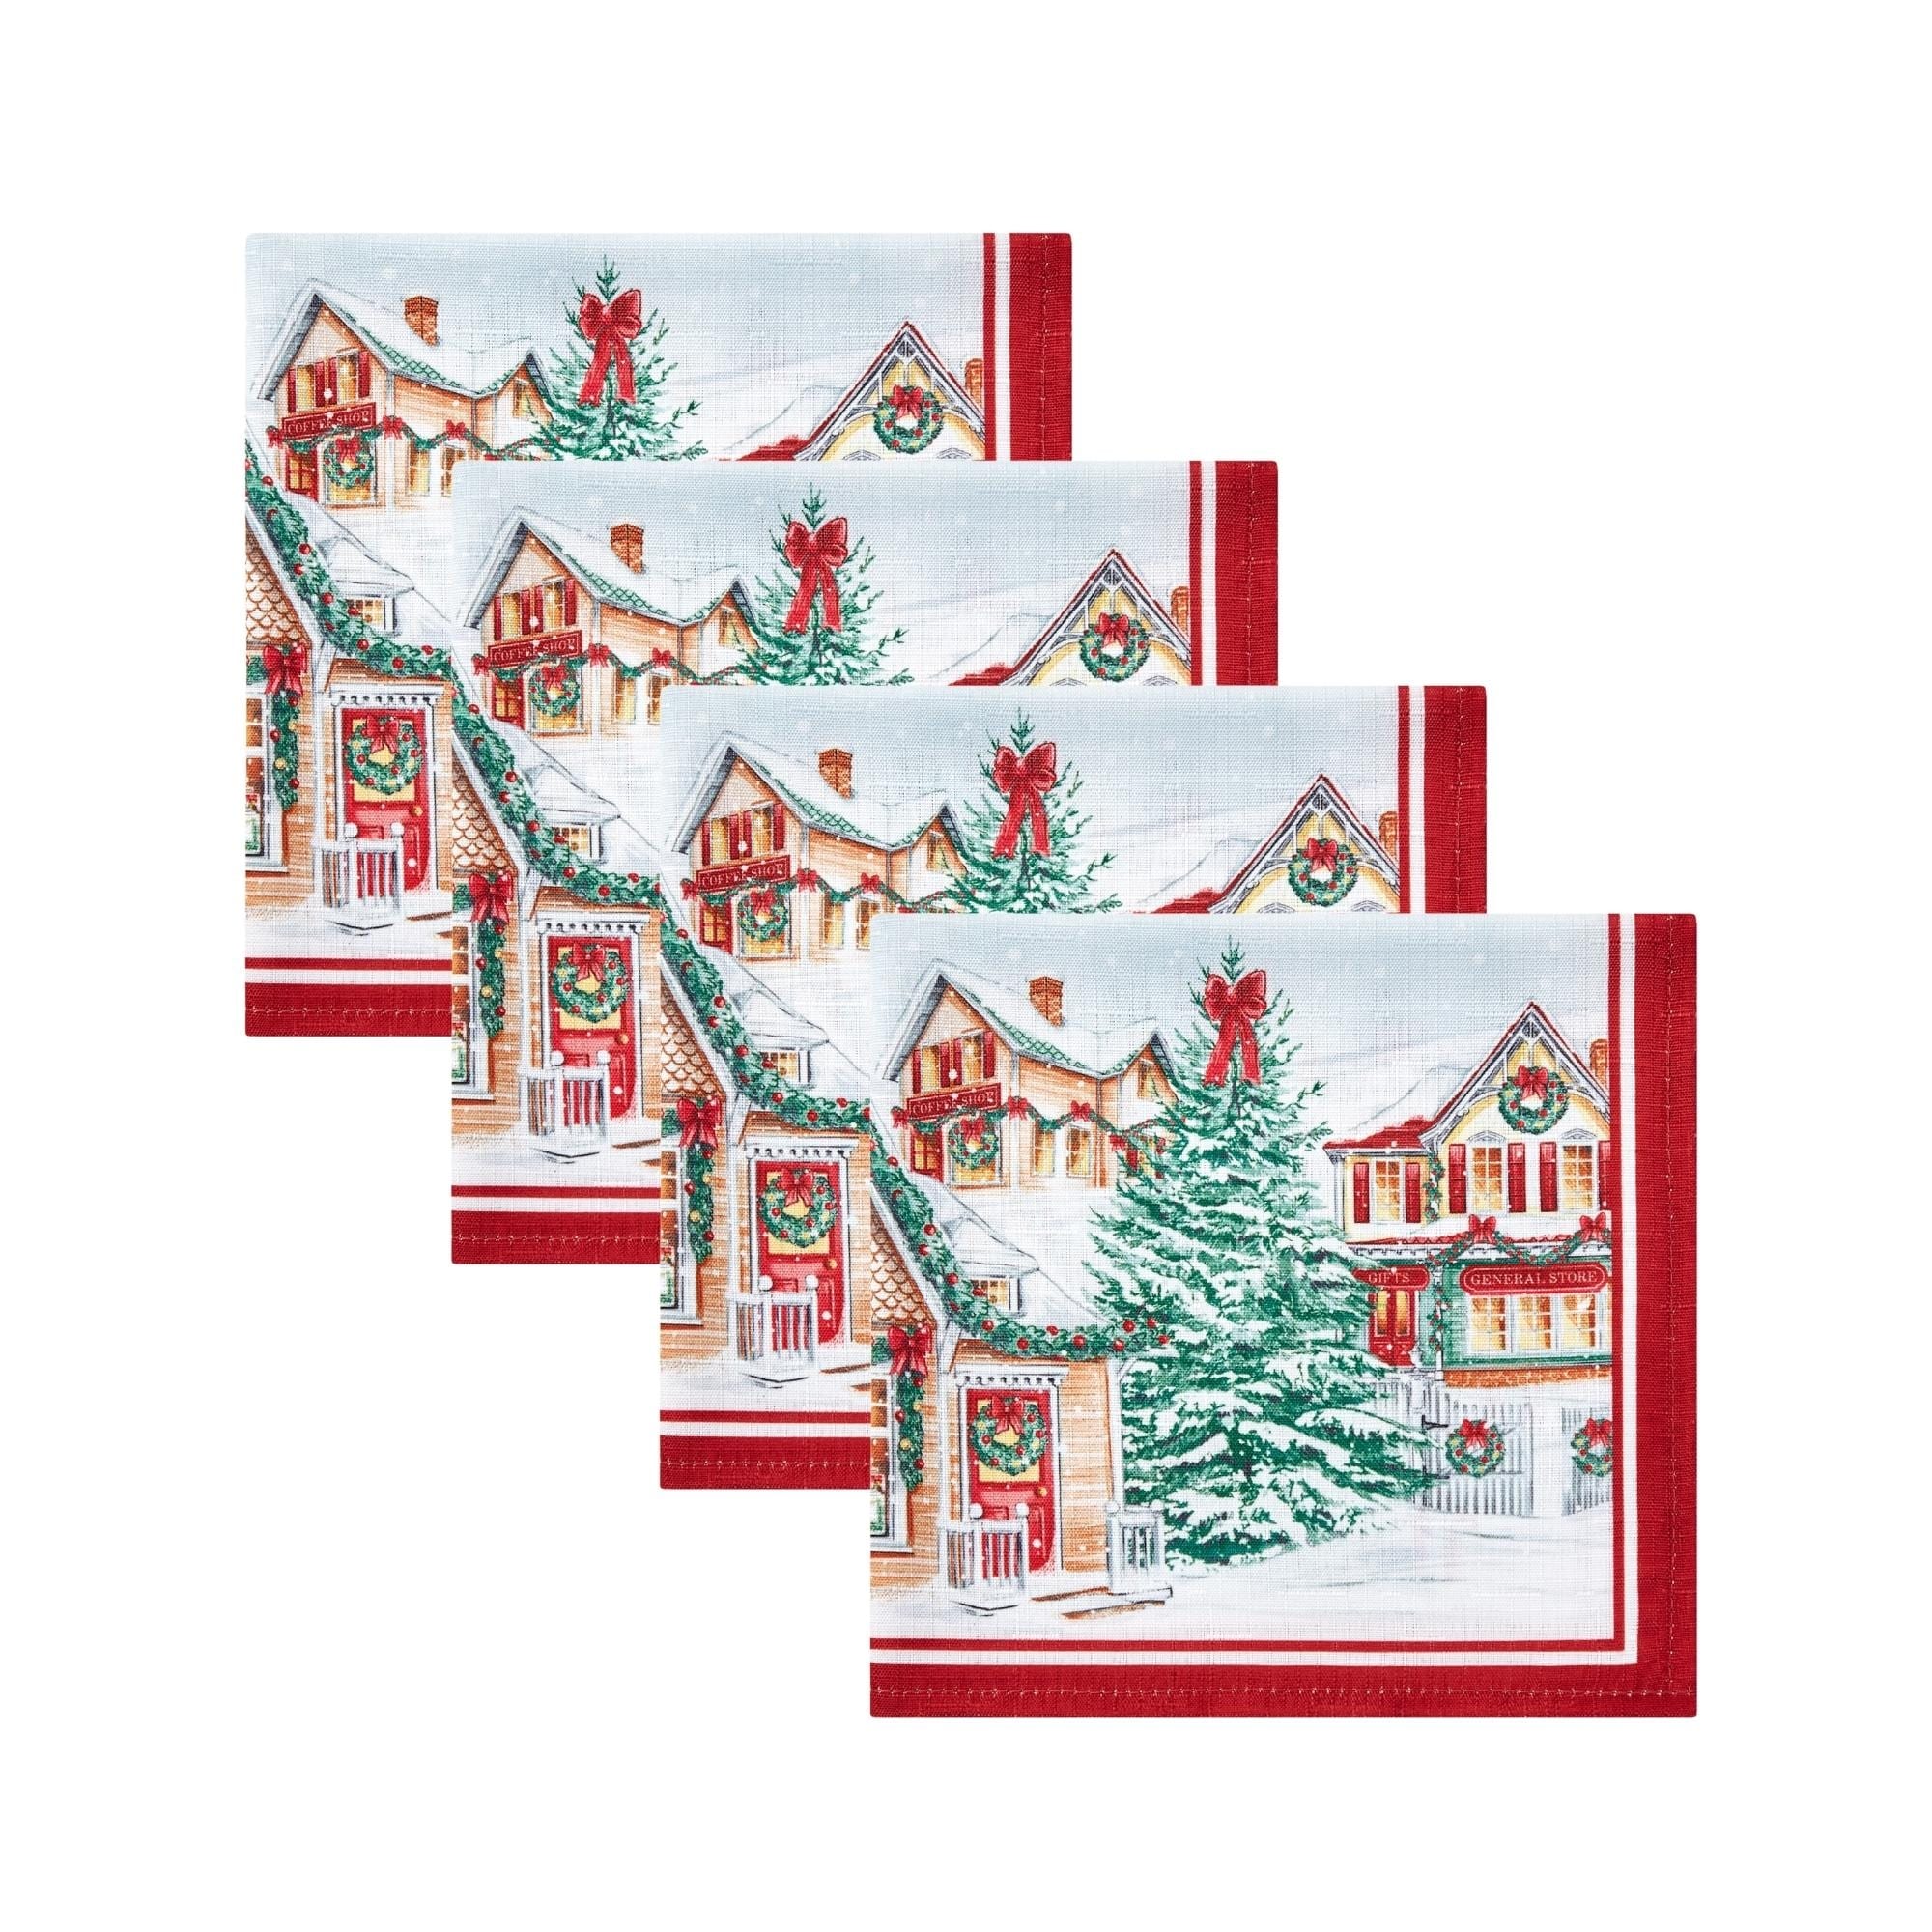 https://ak1.ostkcdn.com/images/products/is/images/direct/e7bfd42b3f15bb71577d0c83da03cf76c7653ddd/Storybook-Christmas-Village-Holiday-Napkin-Set-of-4.jpg